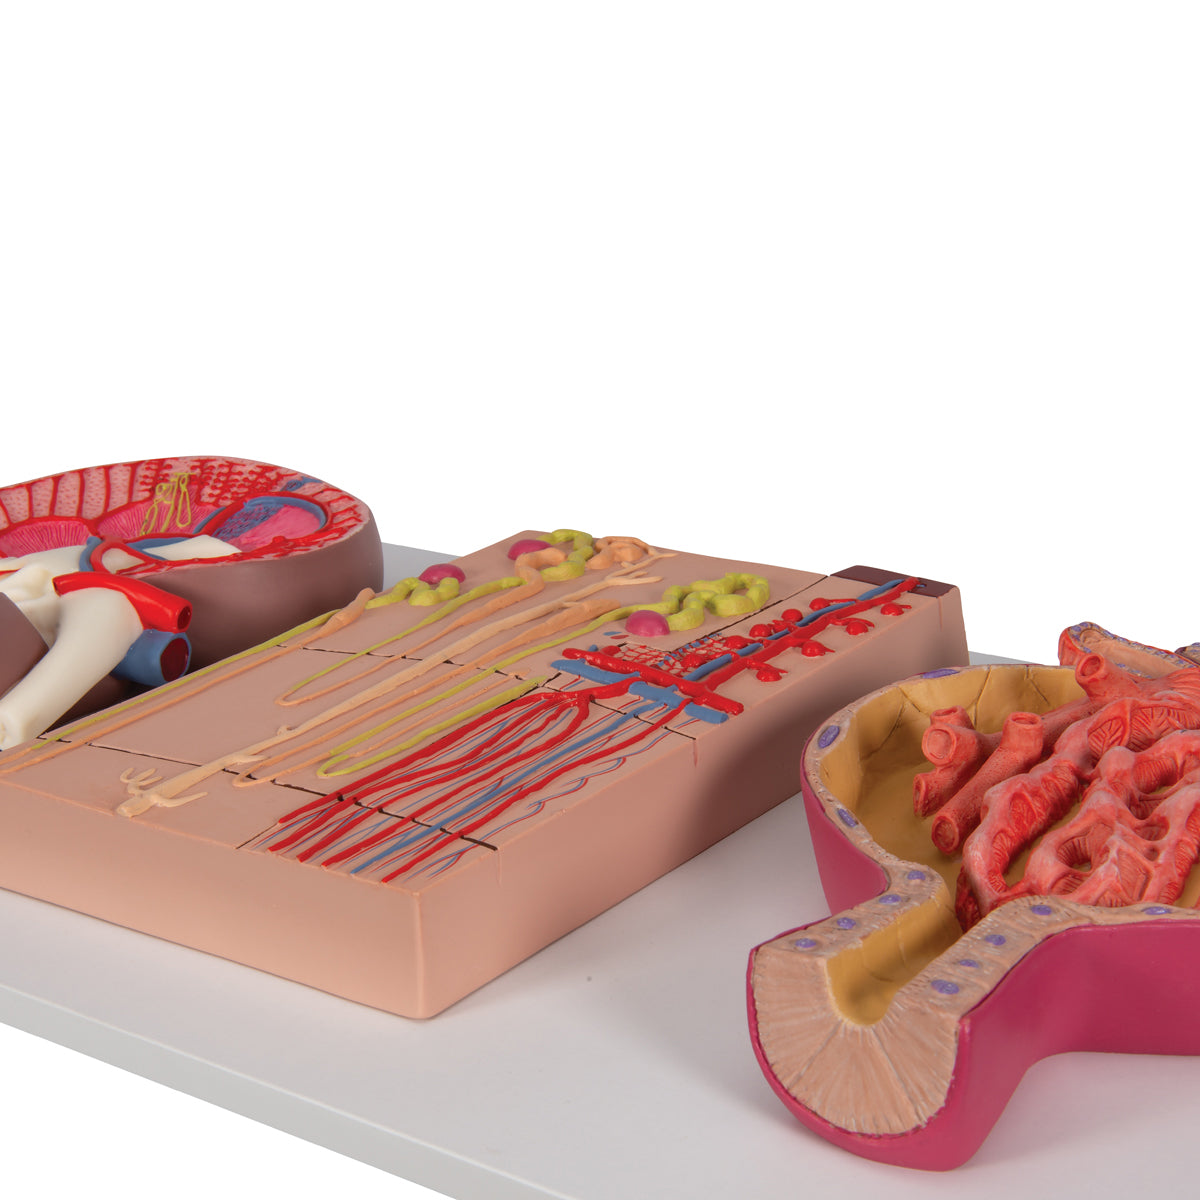 Complete kidney model showing the kidney in longitudinal section, the nephron and the kidney body together on a stand